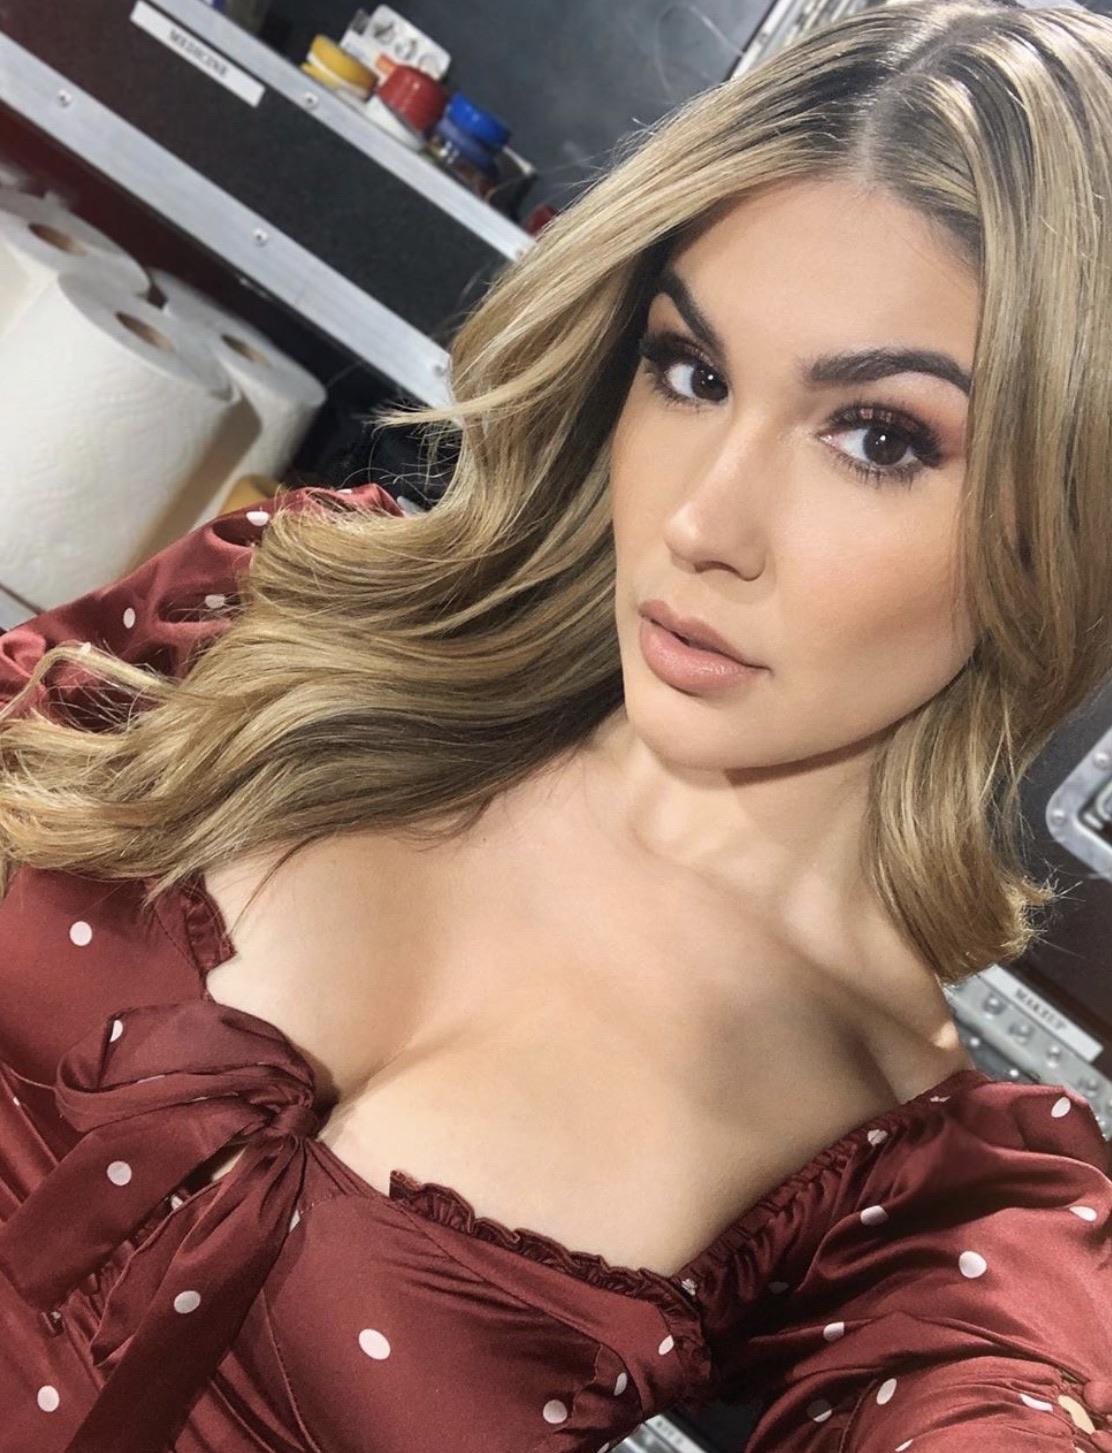 Cathy Kelly Sex Com - Cathy Kelley - Free pics, galleries & more at Babepedia